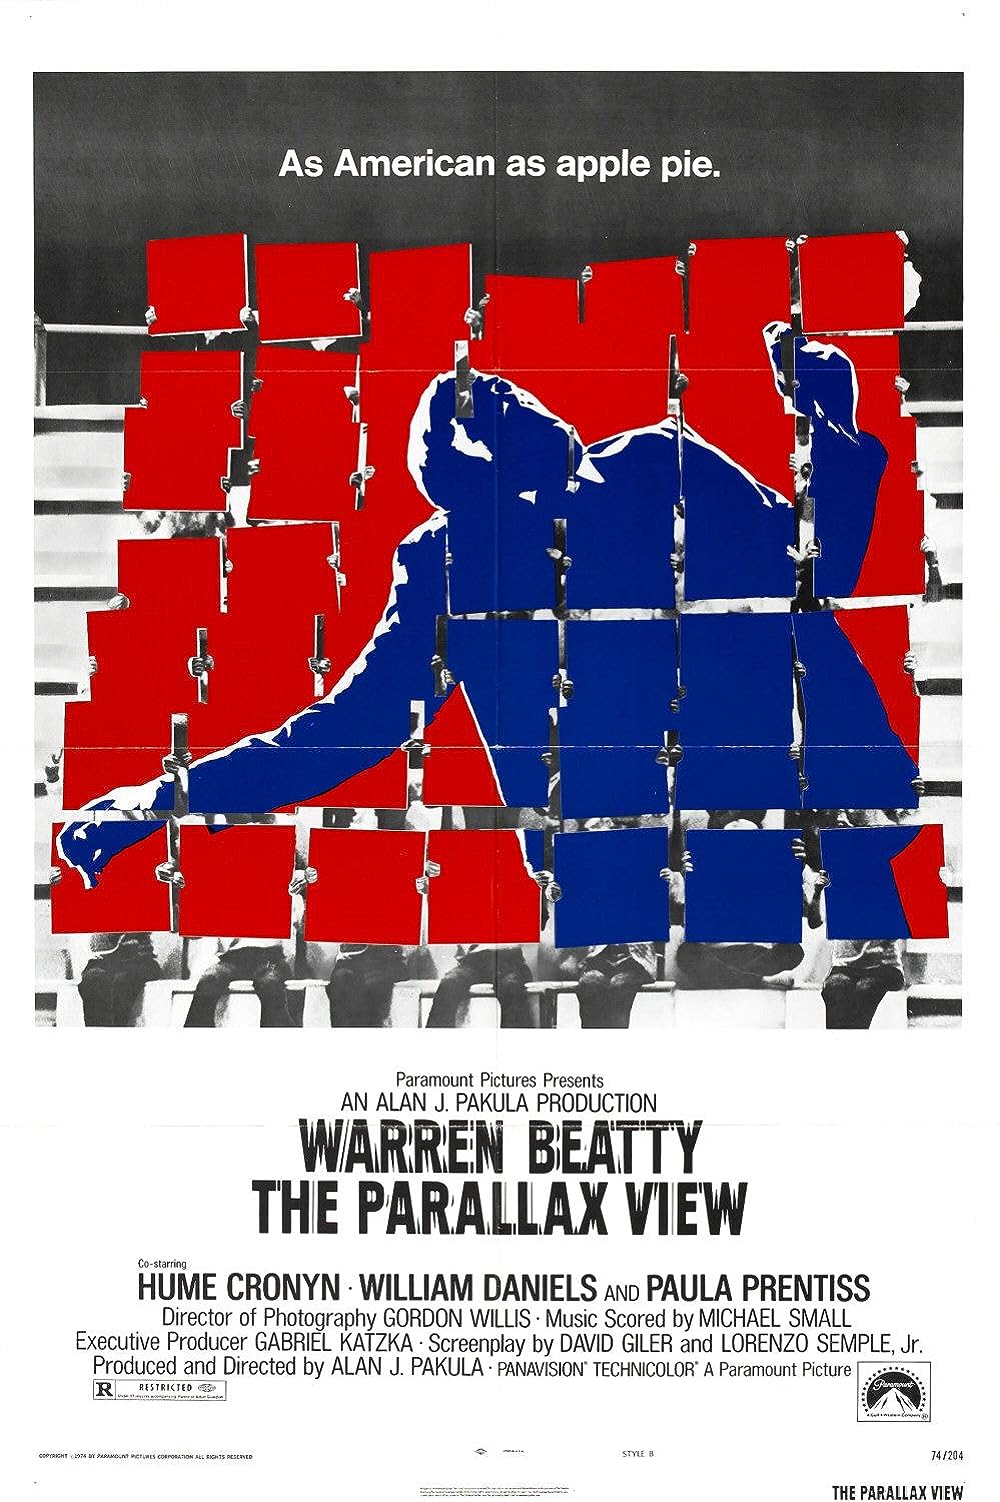 Graphic image of the movie poster for The Parallax View